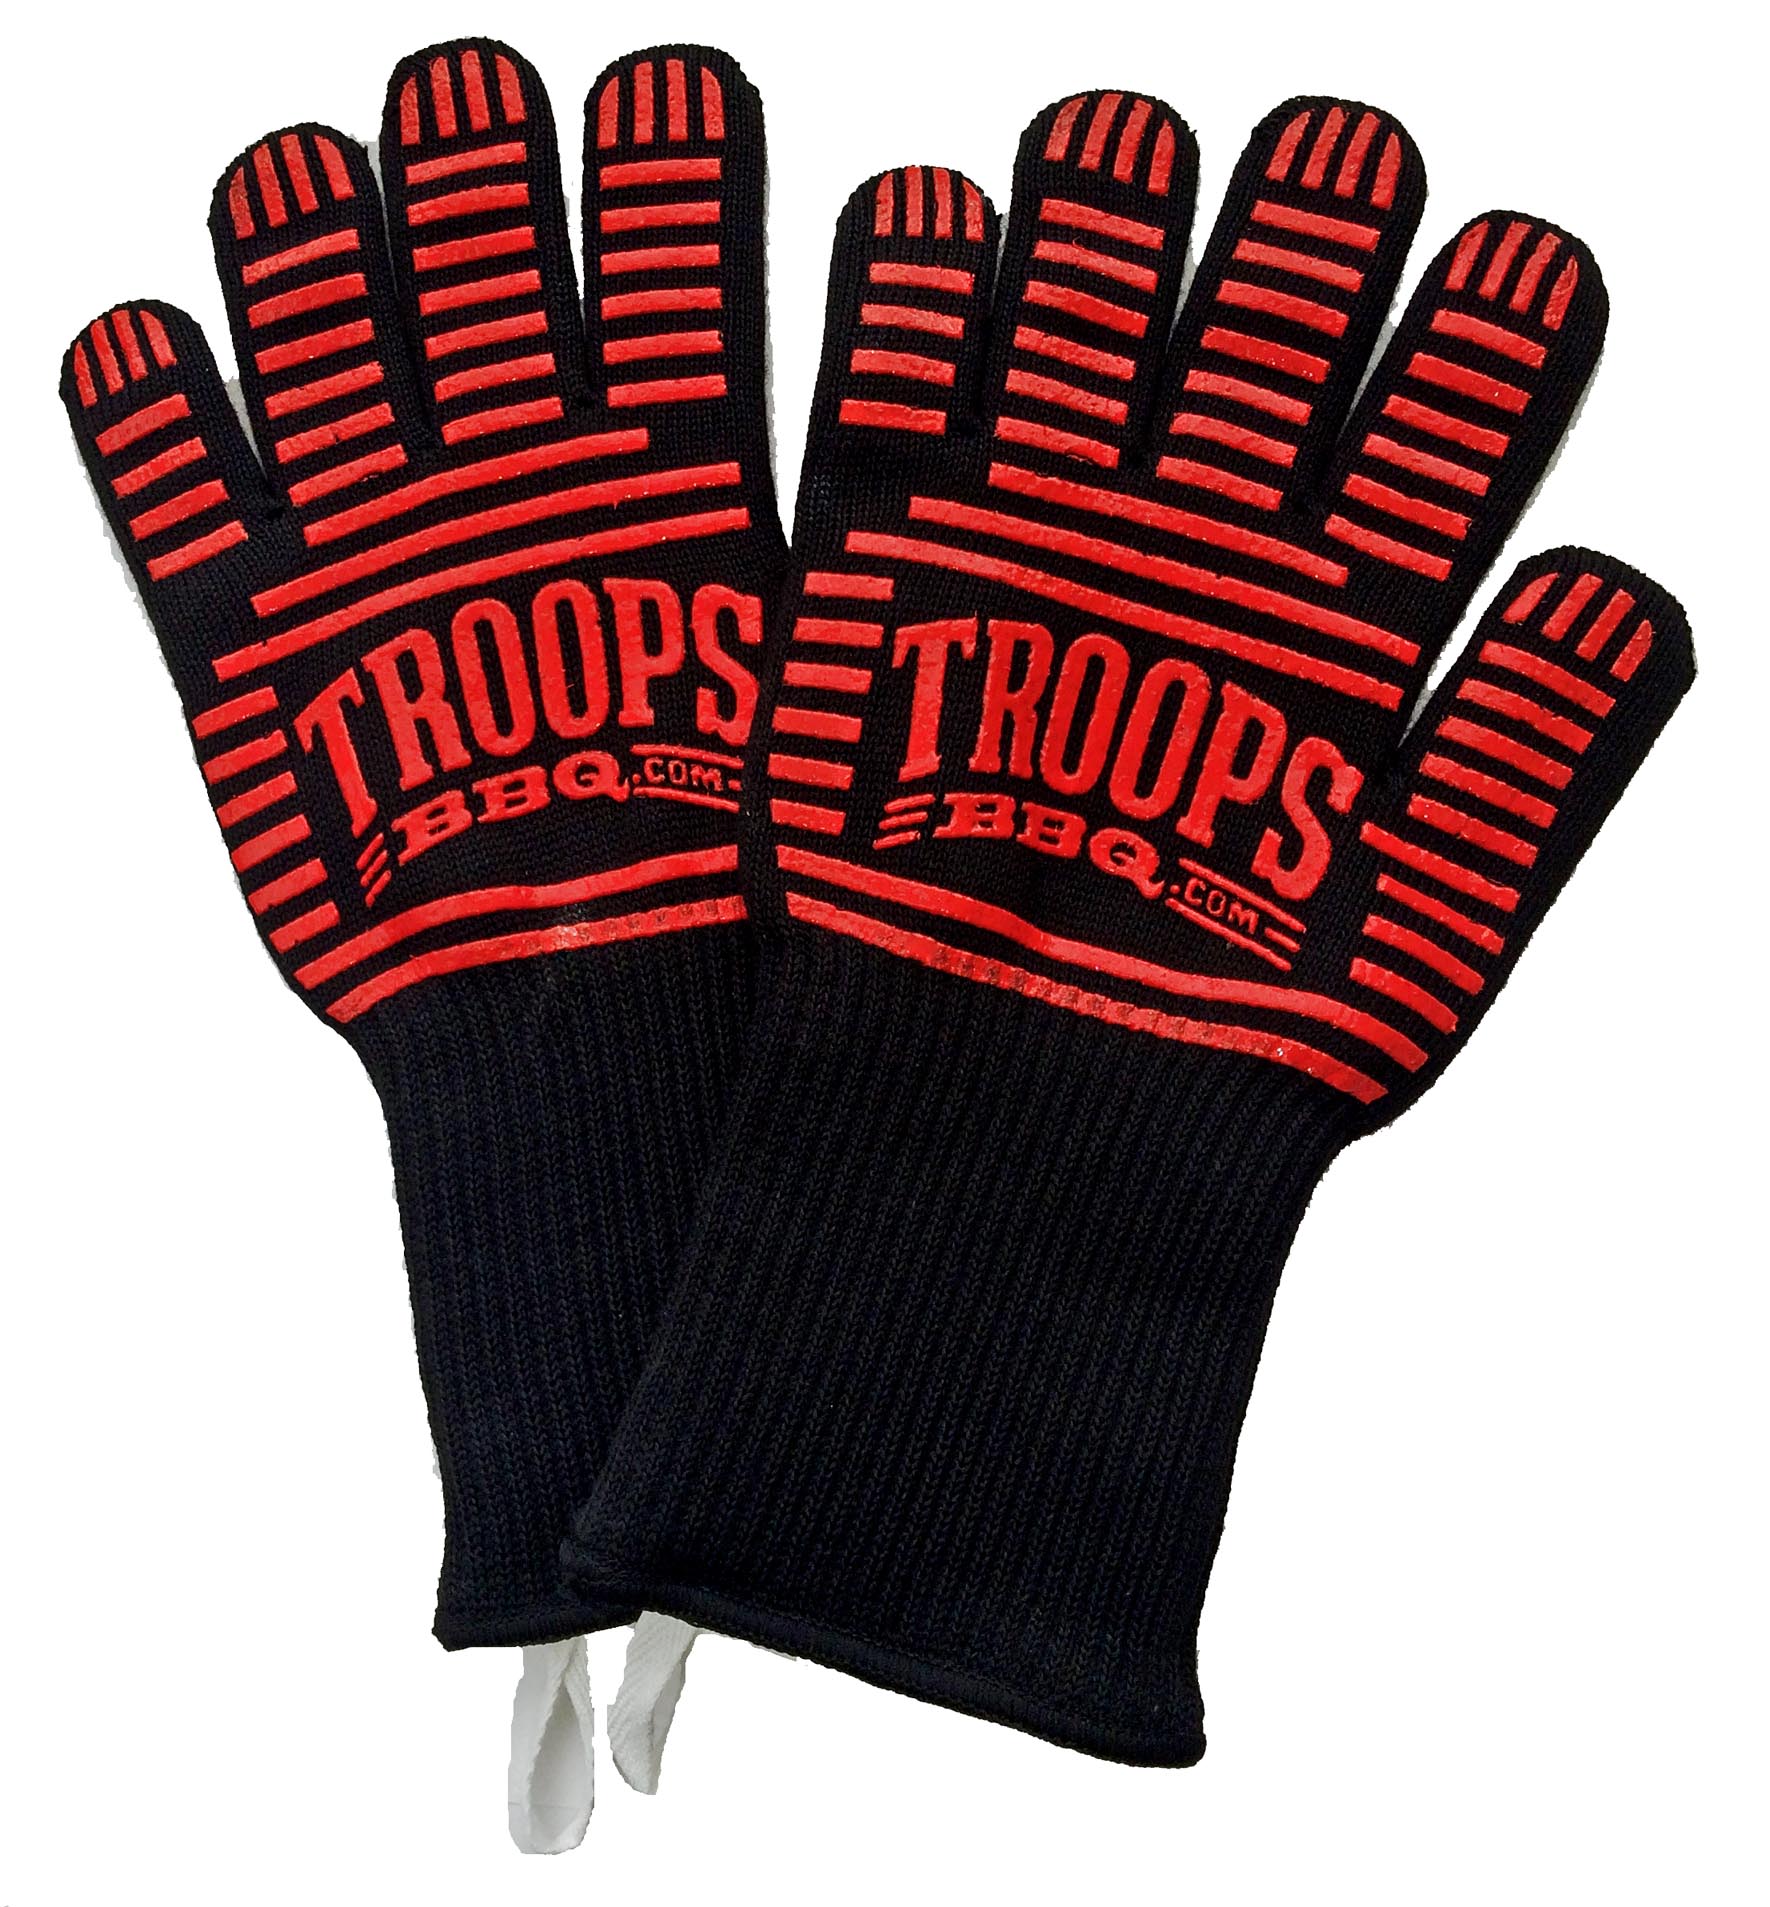 TROOPS BBQ 662°F Extreme Heat Resistant Grilling Gloves with Extra-Long Cuff for Barbecue & Oven (Pair) - Heat & Flame Resistant Kevlar & Silicone Insulated Protection to 662°F! - image 1 of 4